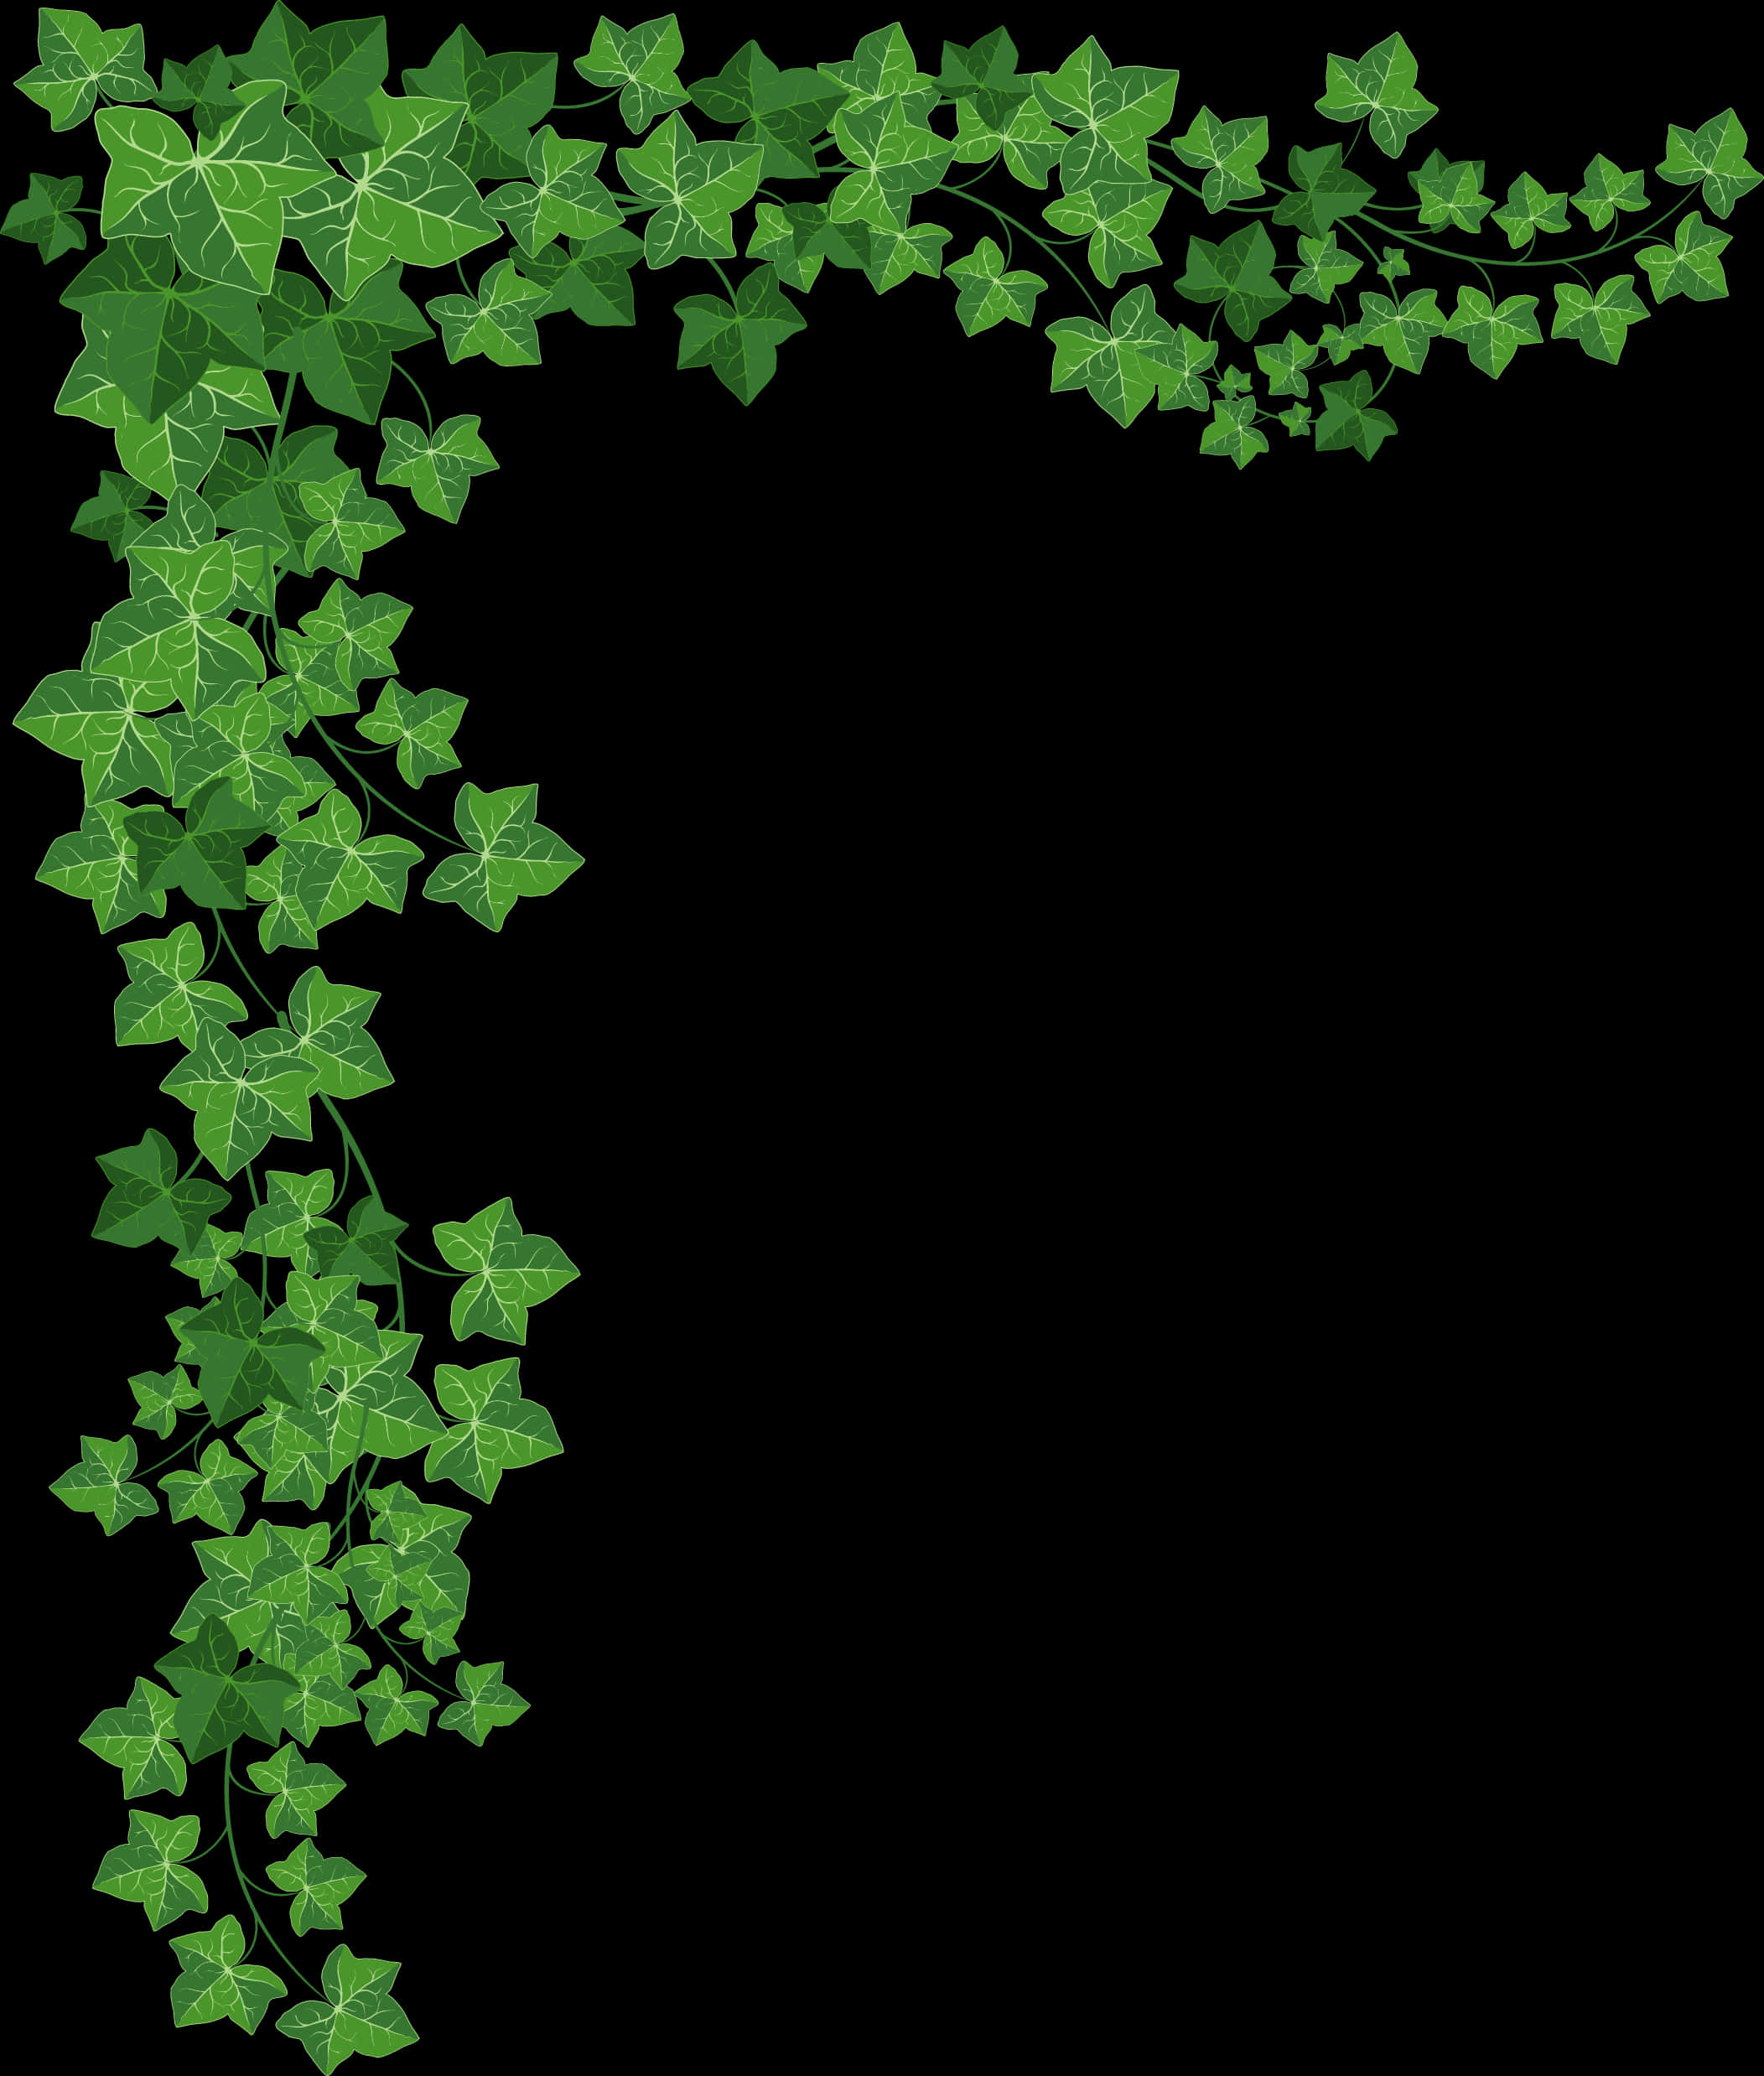 A Green Ivy On A Black Background